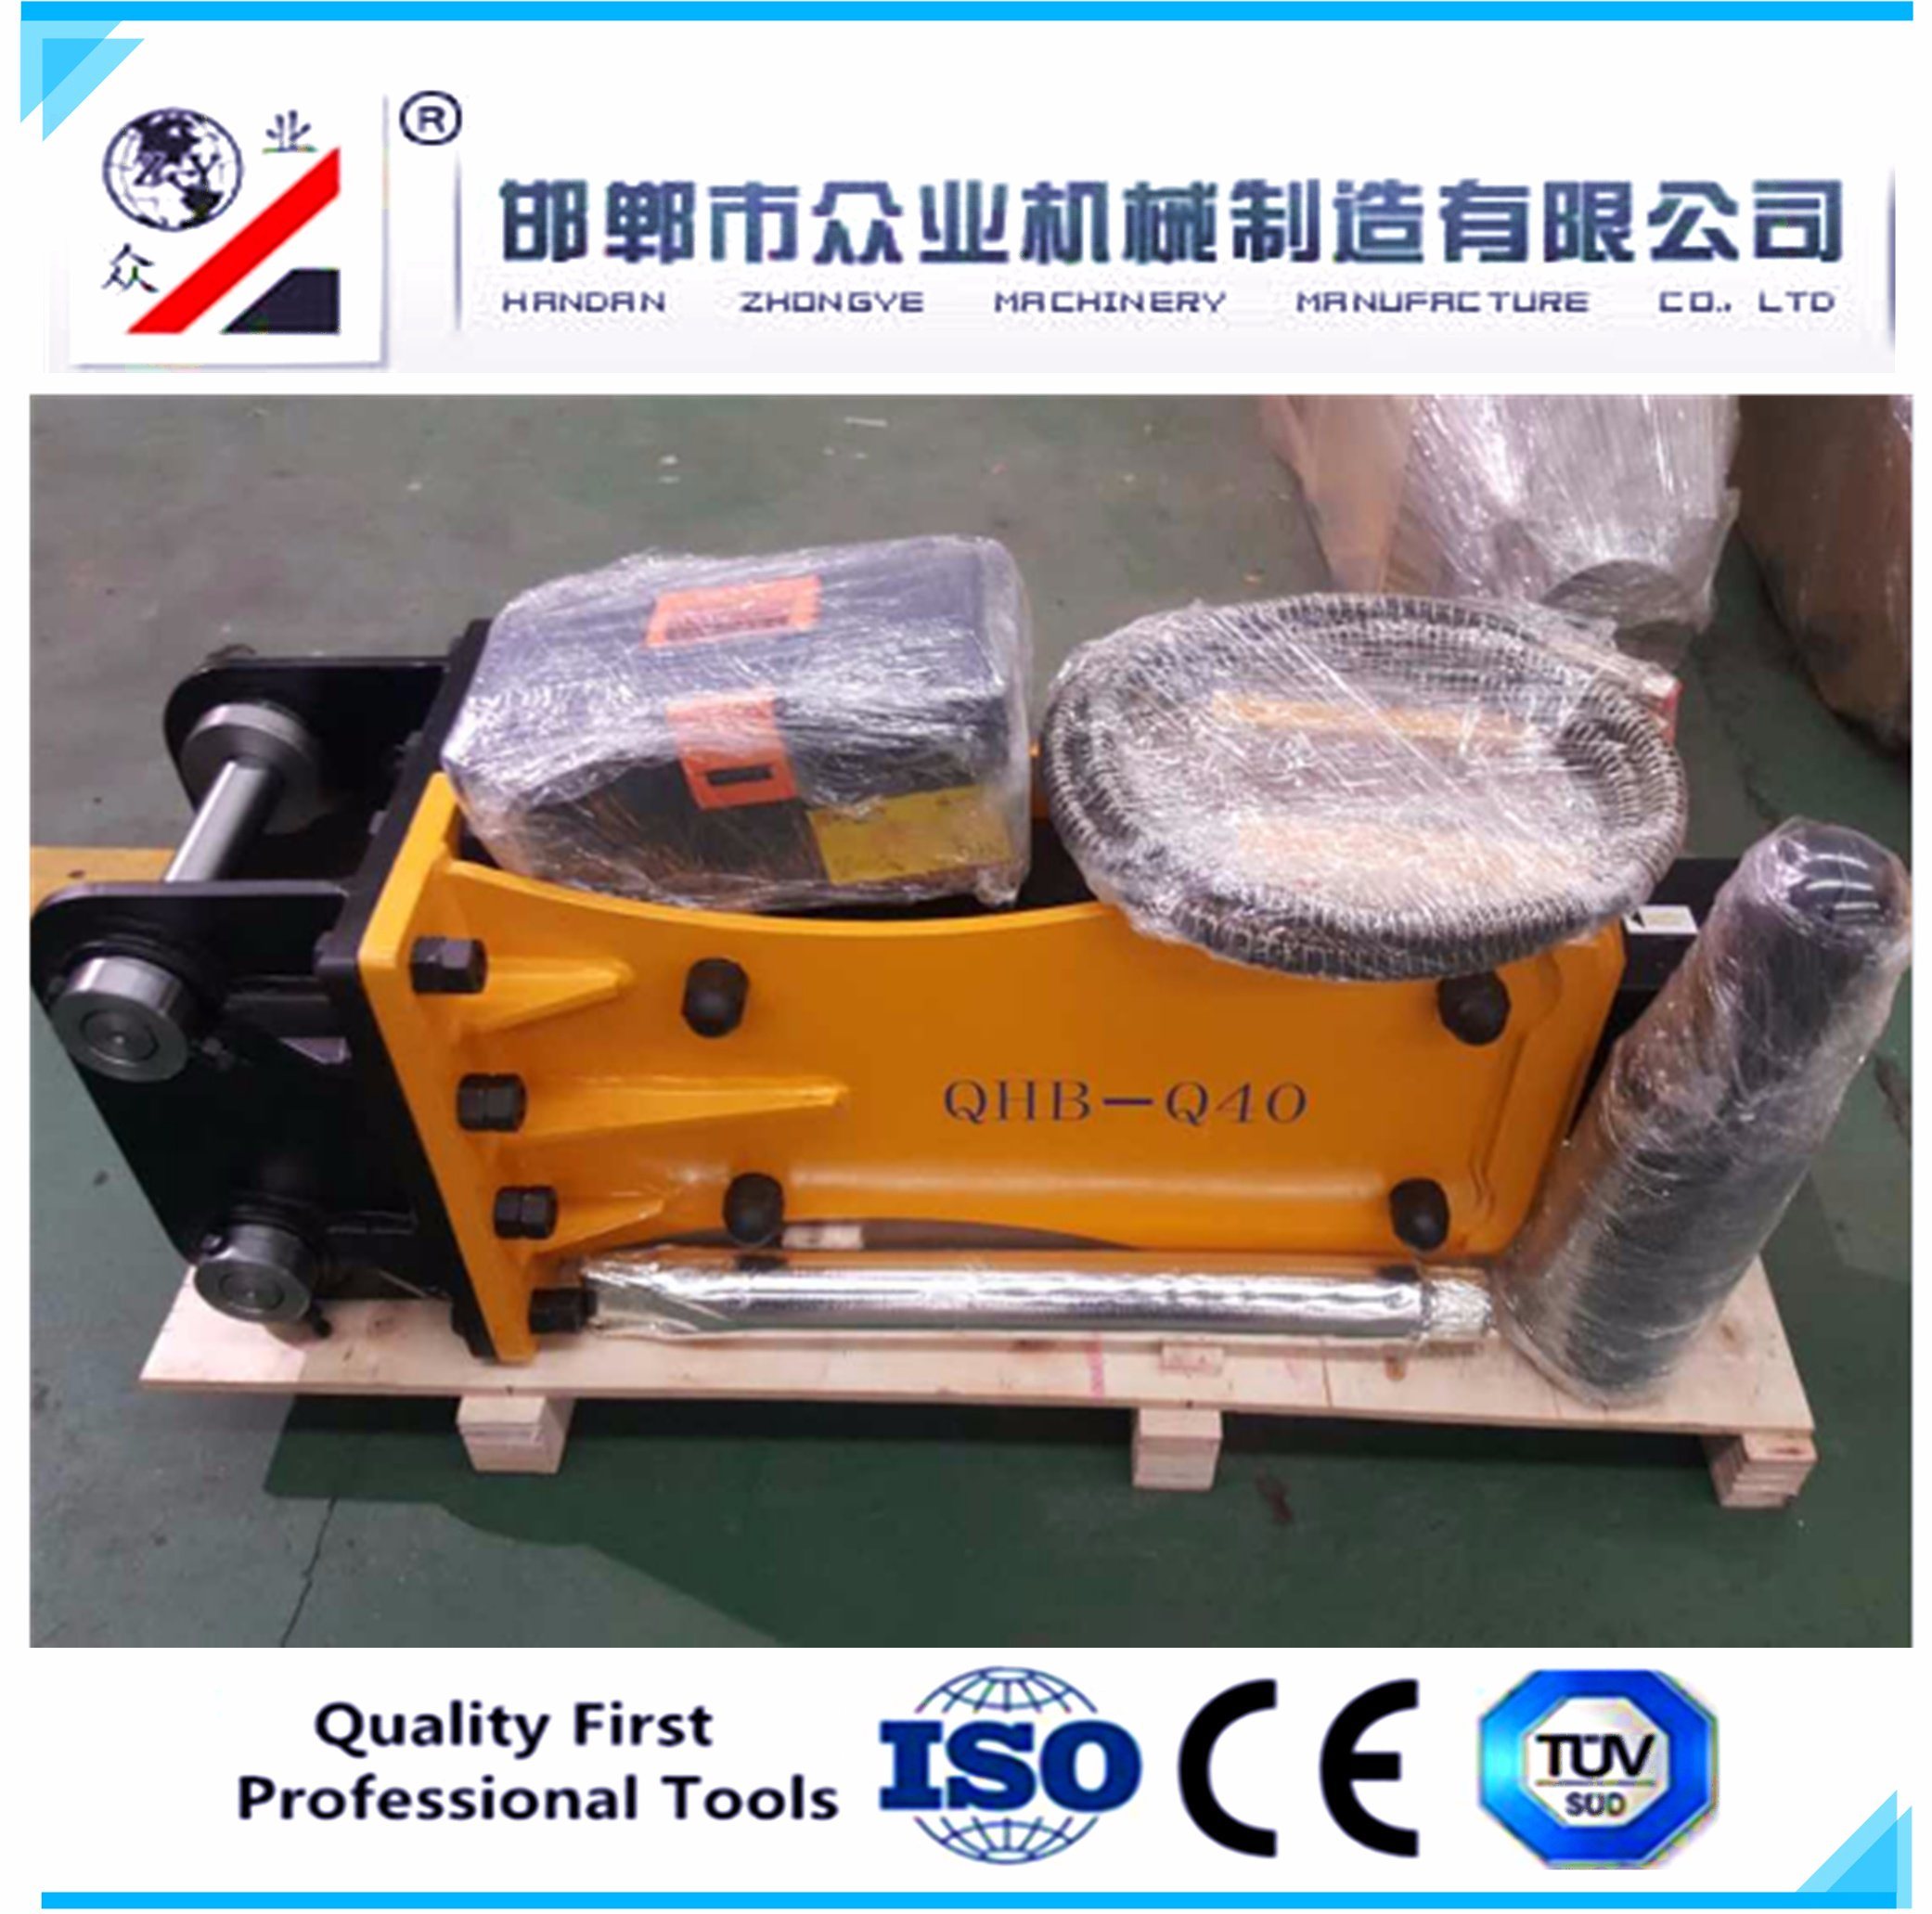 Top Type Rock Breaker Spare Part Bracket Frame 2017 Featured Image